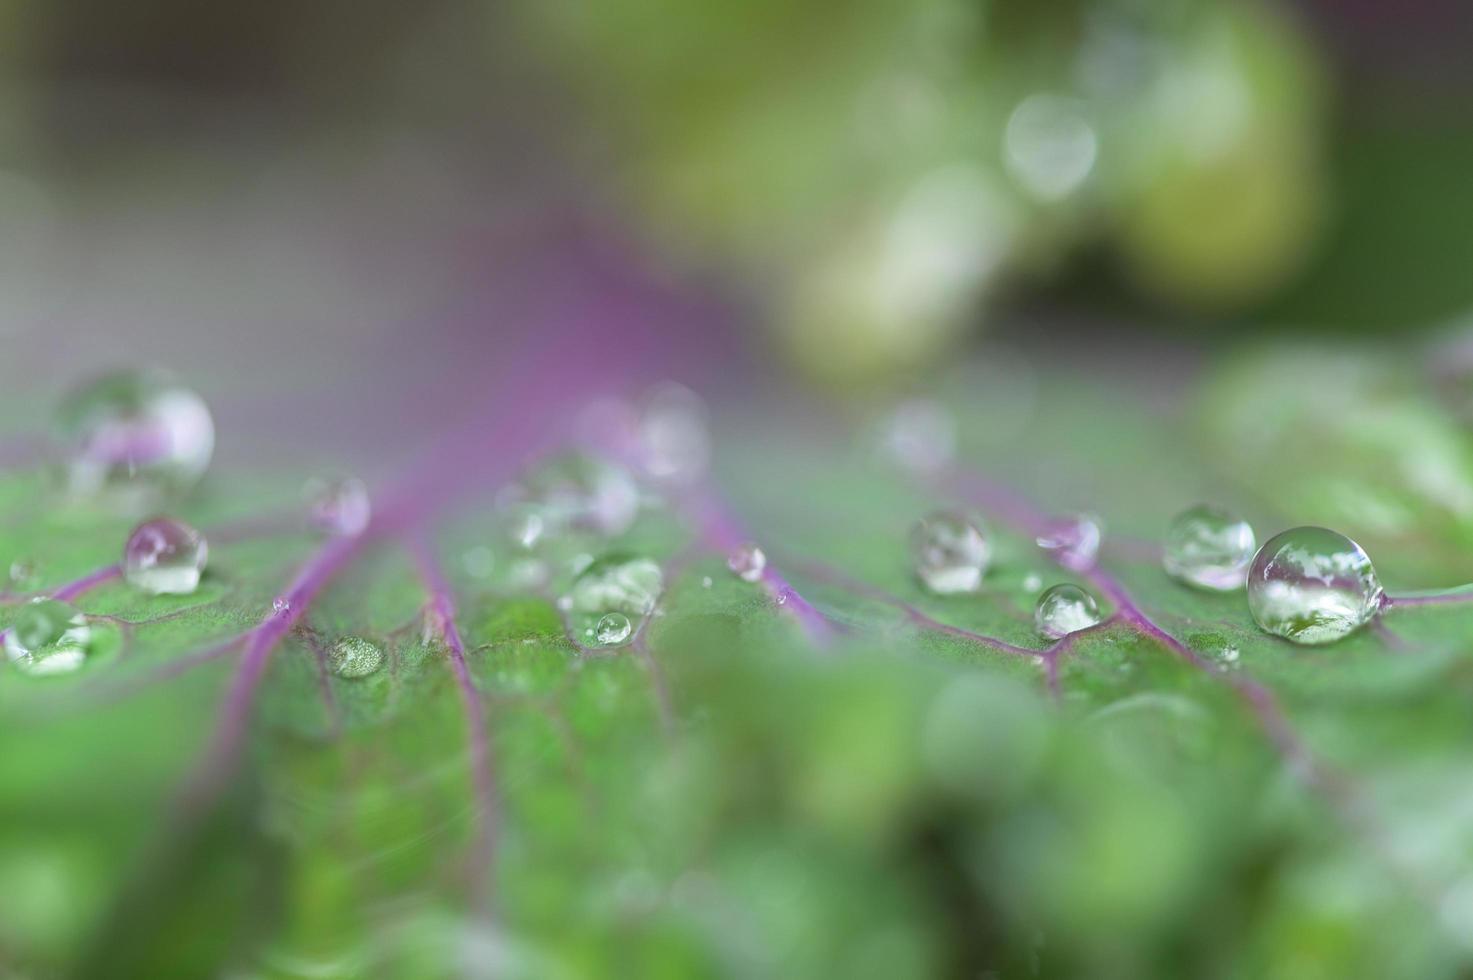 Water droplets on a leaf photo